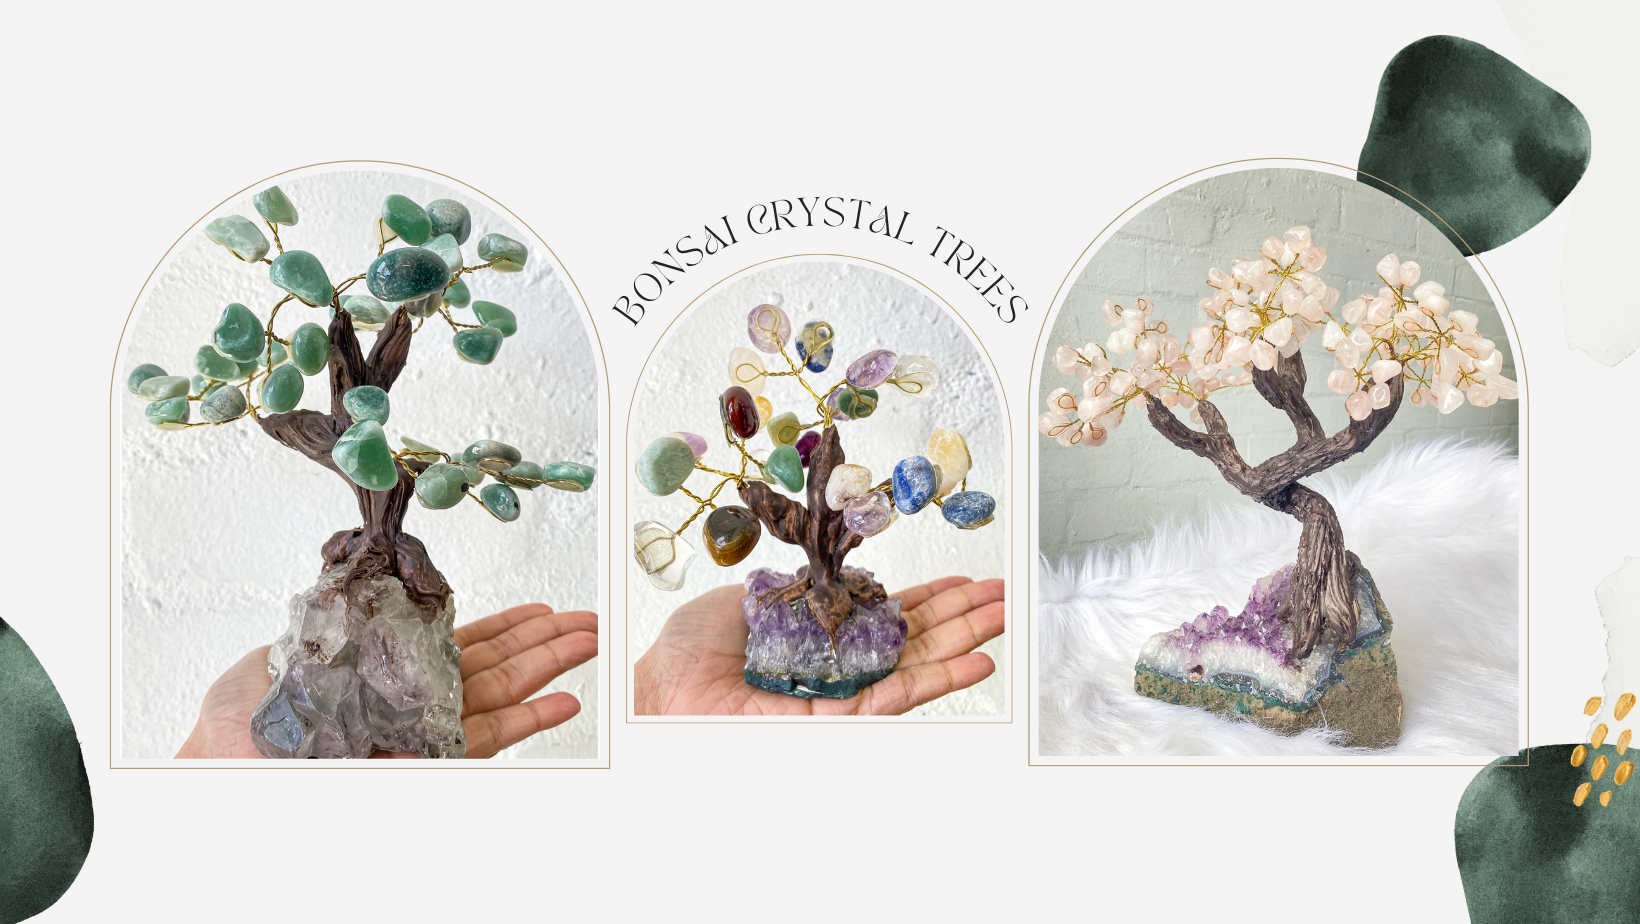 BONSAI CRYSTAL TREES: NATURE'S MASTERPIECE IN CRYSTAL CLUSTERS